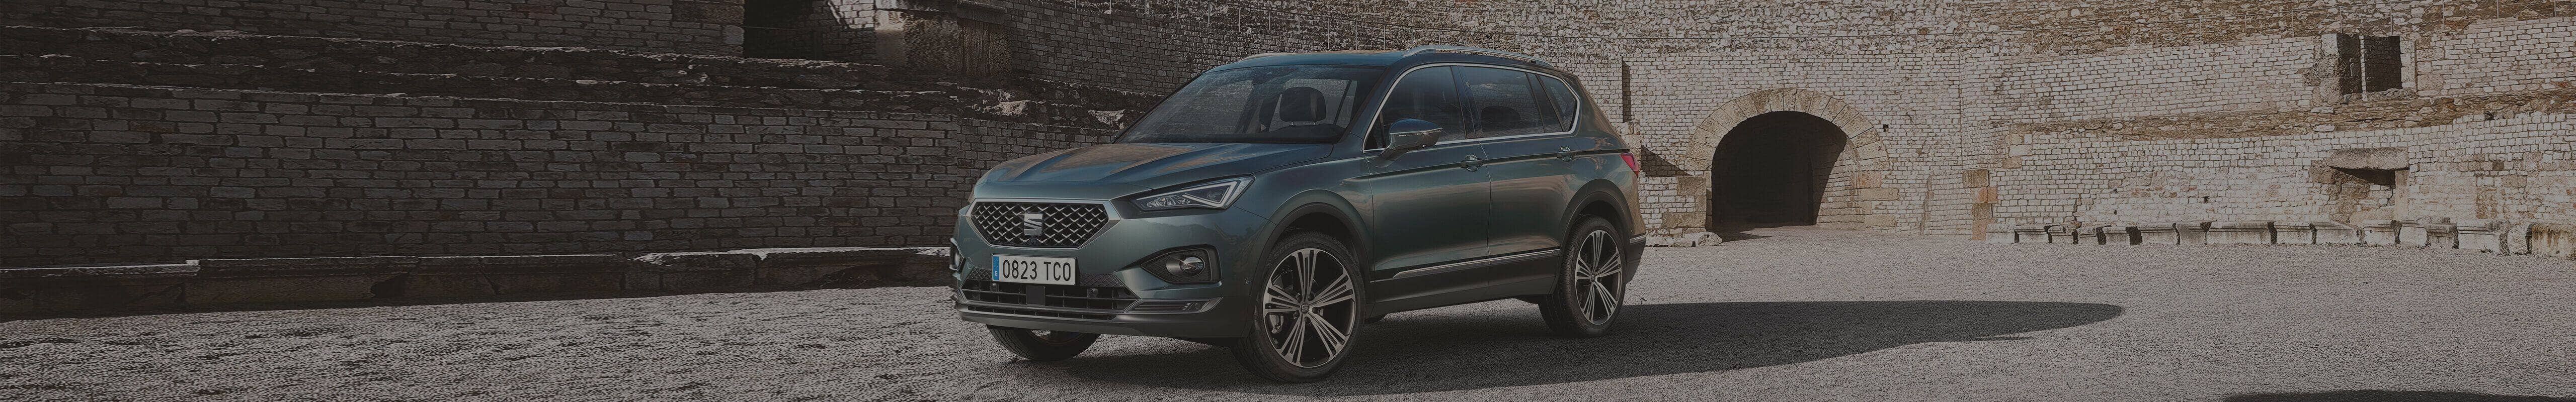 SEAT Tarraco large SUV at the old roman circus ruins - Two new assistants for the Tarraco